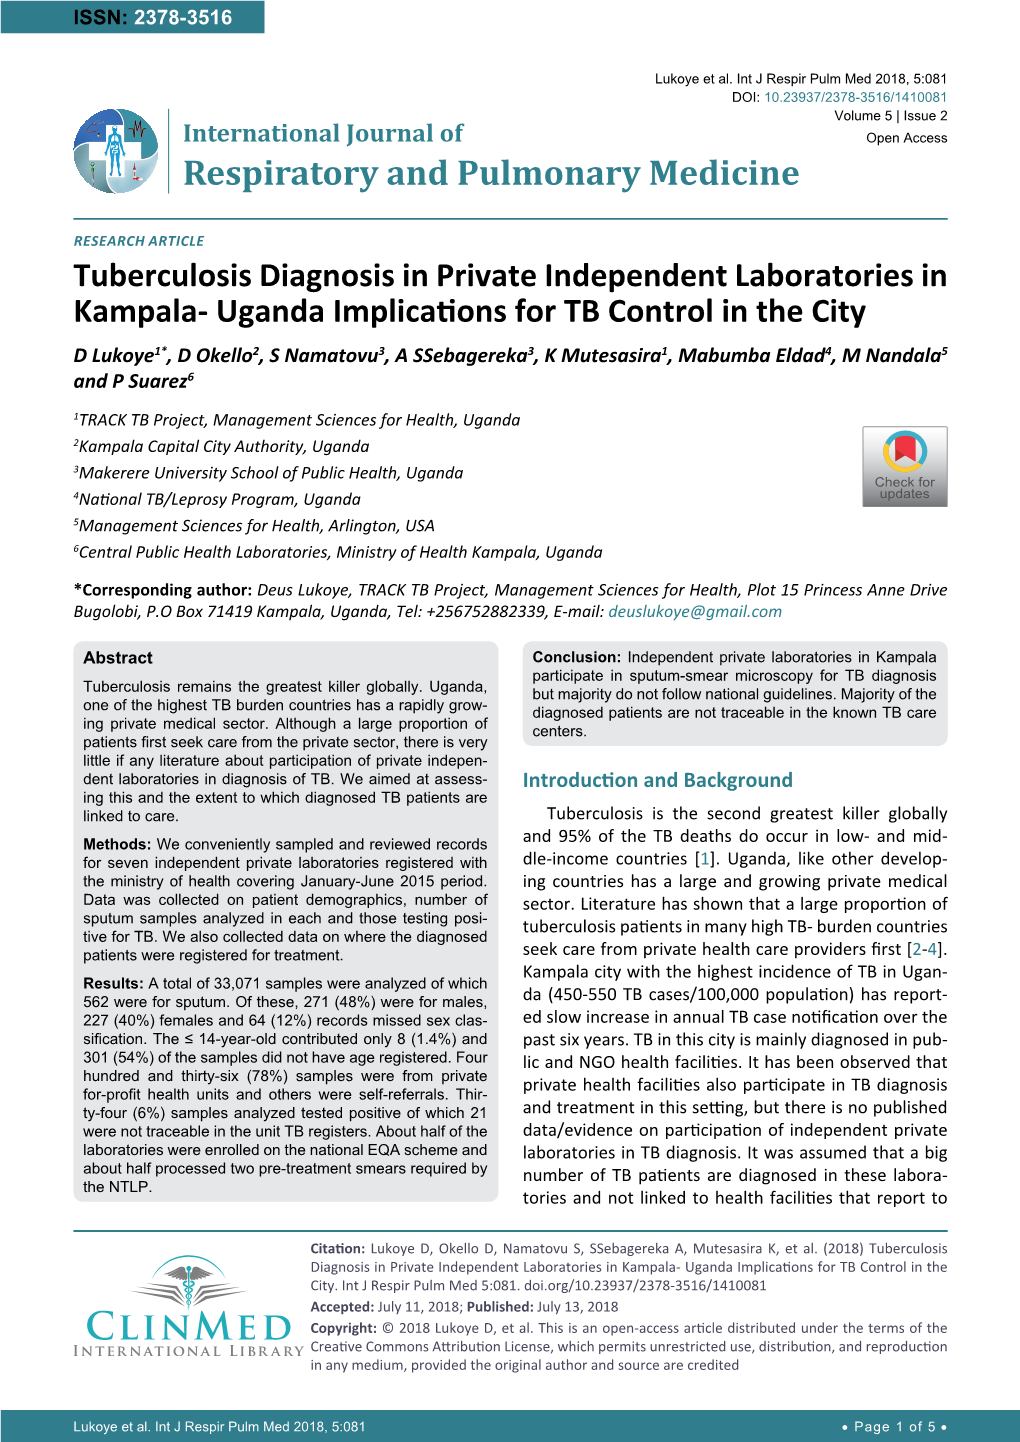 Tuberculosis Diagnosis in Private Independent Laboratories in Kampala-Uganda Implications for TB Control in the City